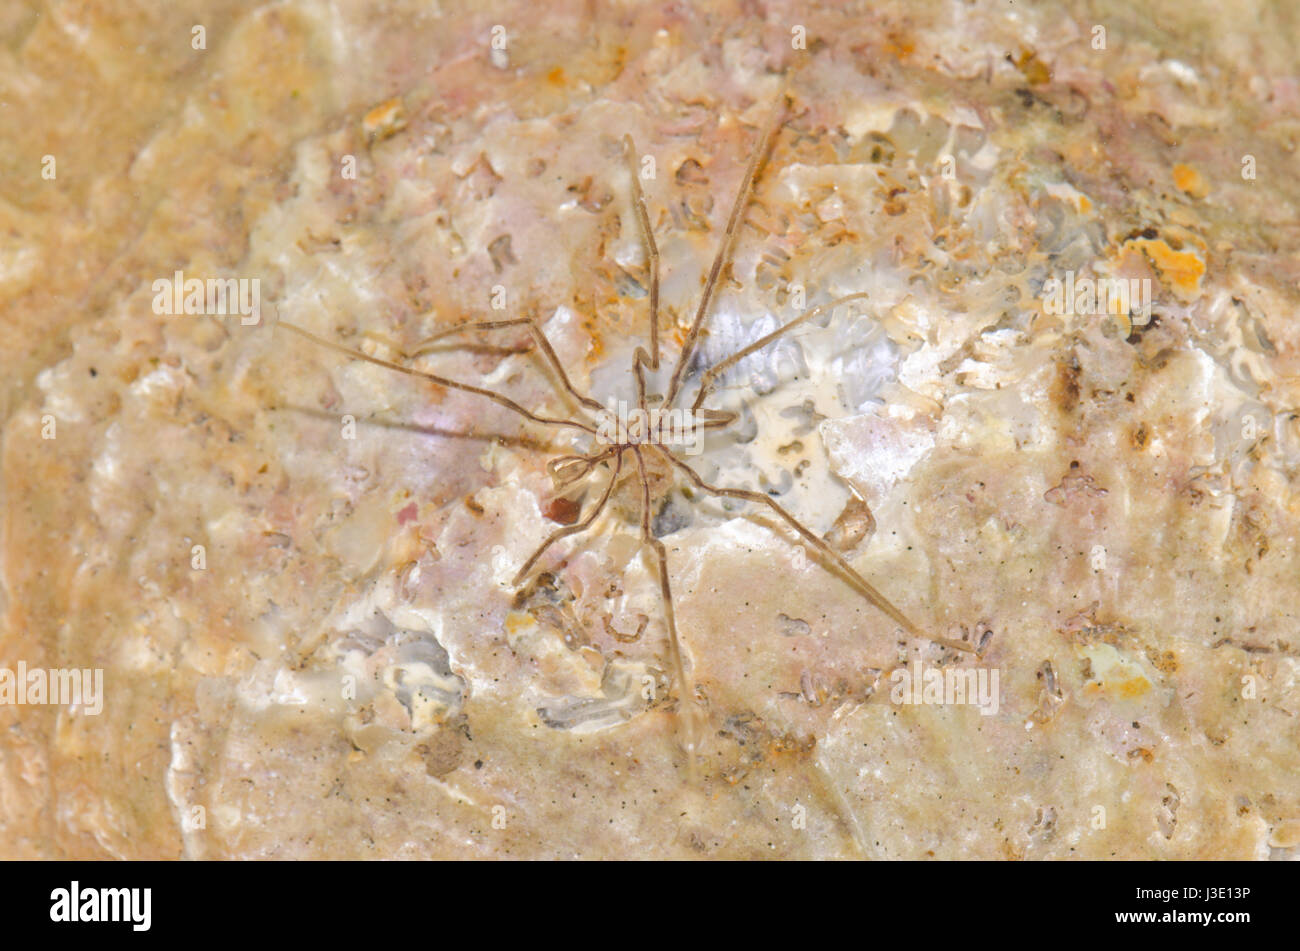 Sea Spider (Nymphon sp) Male Stock Photo